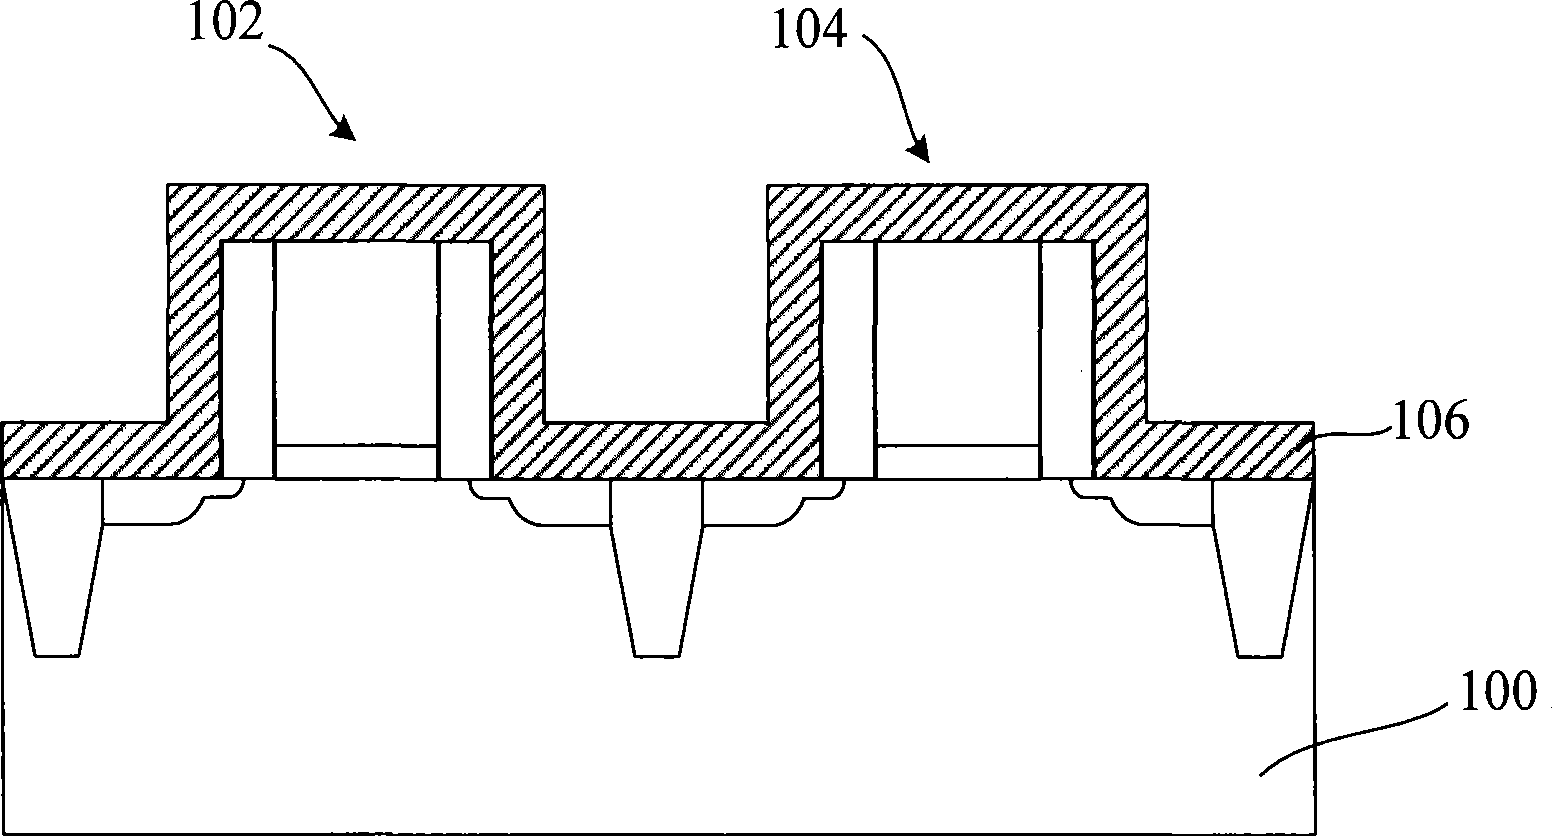 Method for manufacturing double-stress membrane complementary metal oxide semiconductor (CMOS) transistor